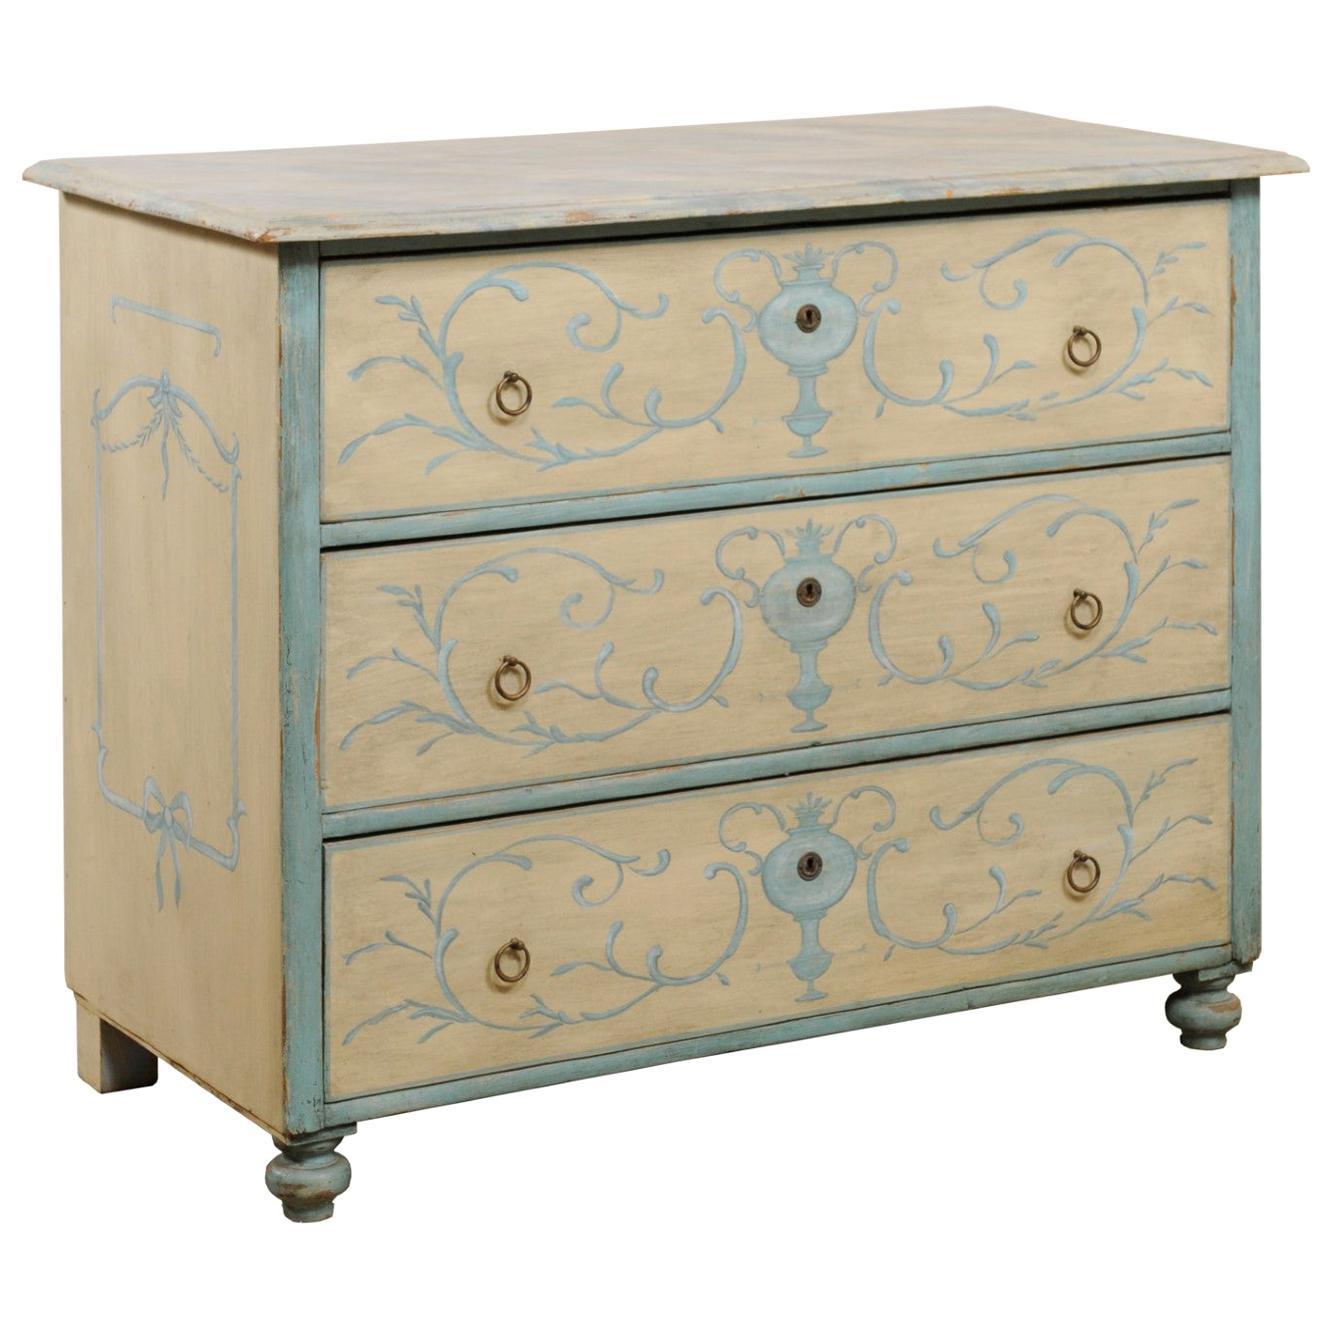 Antique European Chest with Neoclassical Inspired Painting and Faux Marble Top